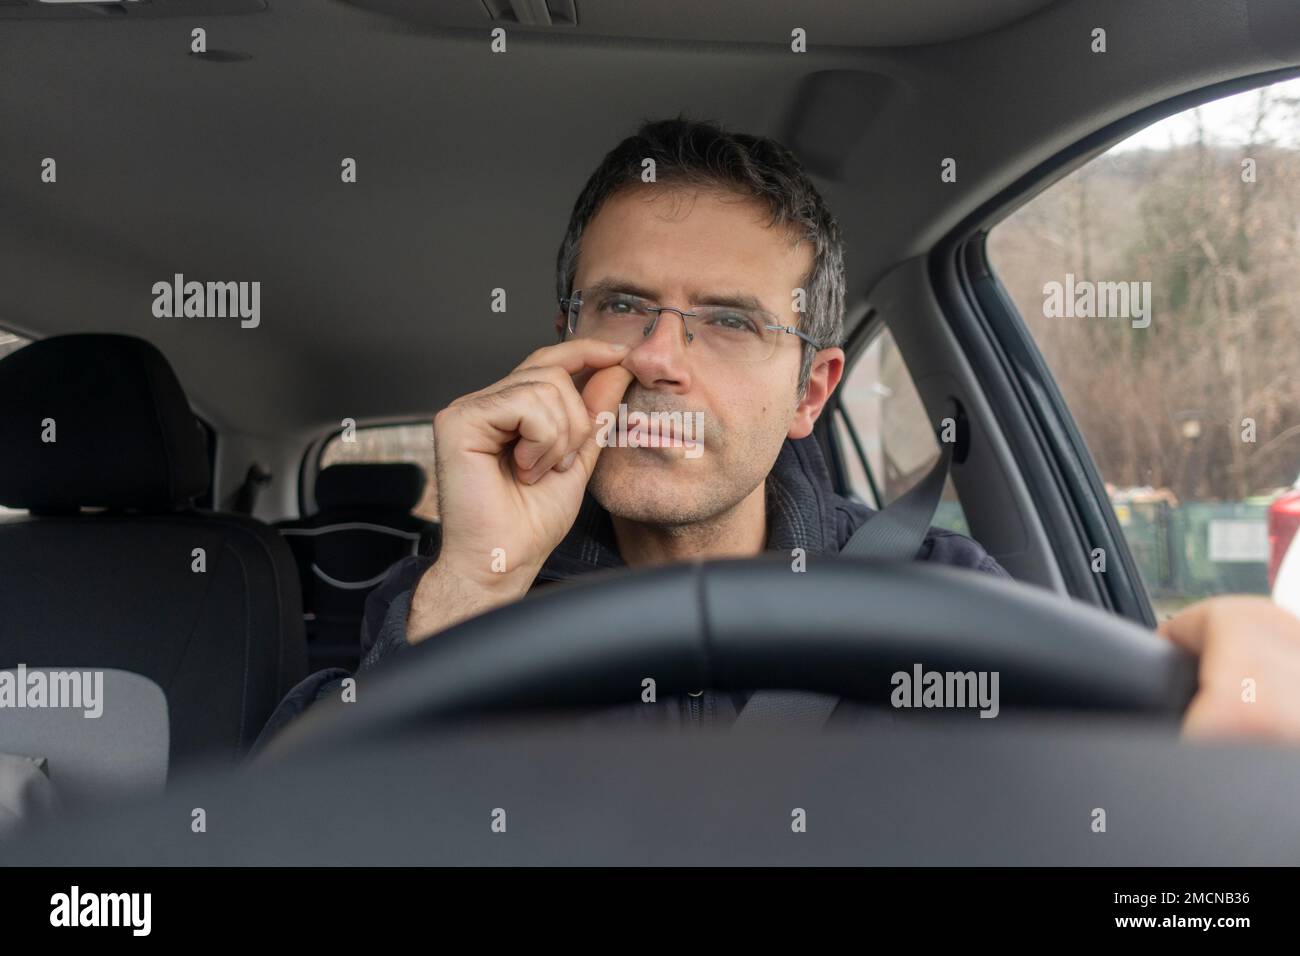 Man in car with finger into nose while driving. Stock Photo